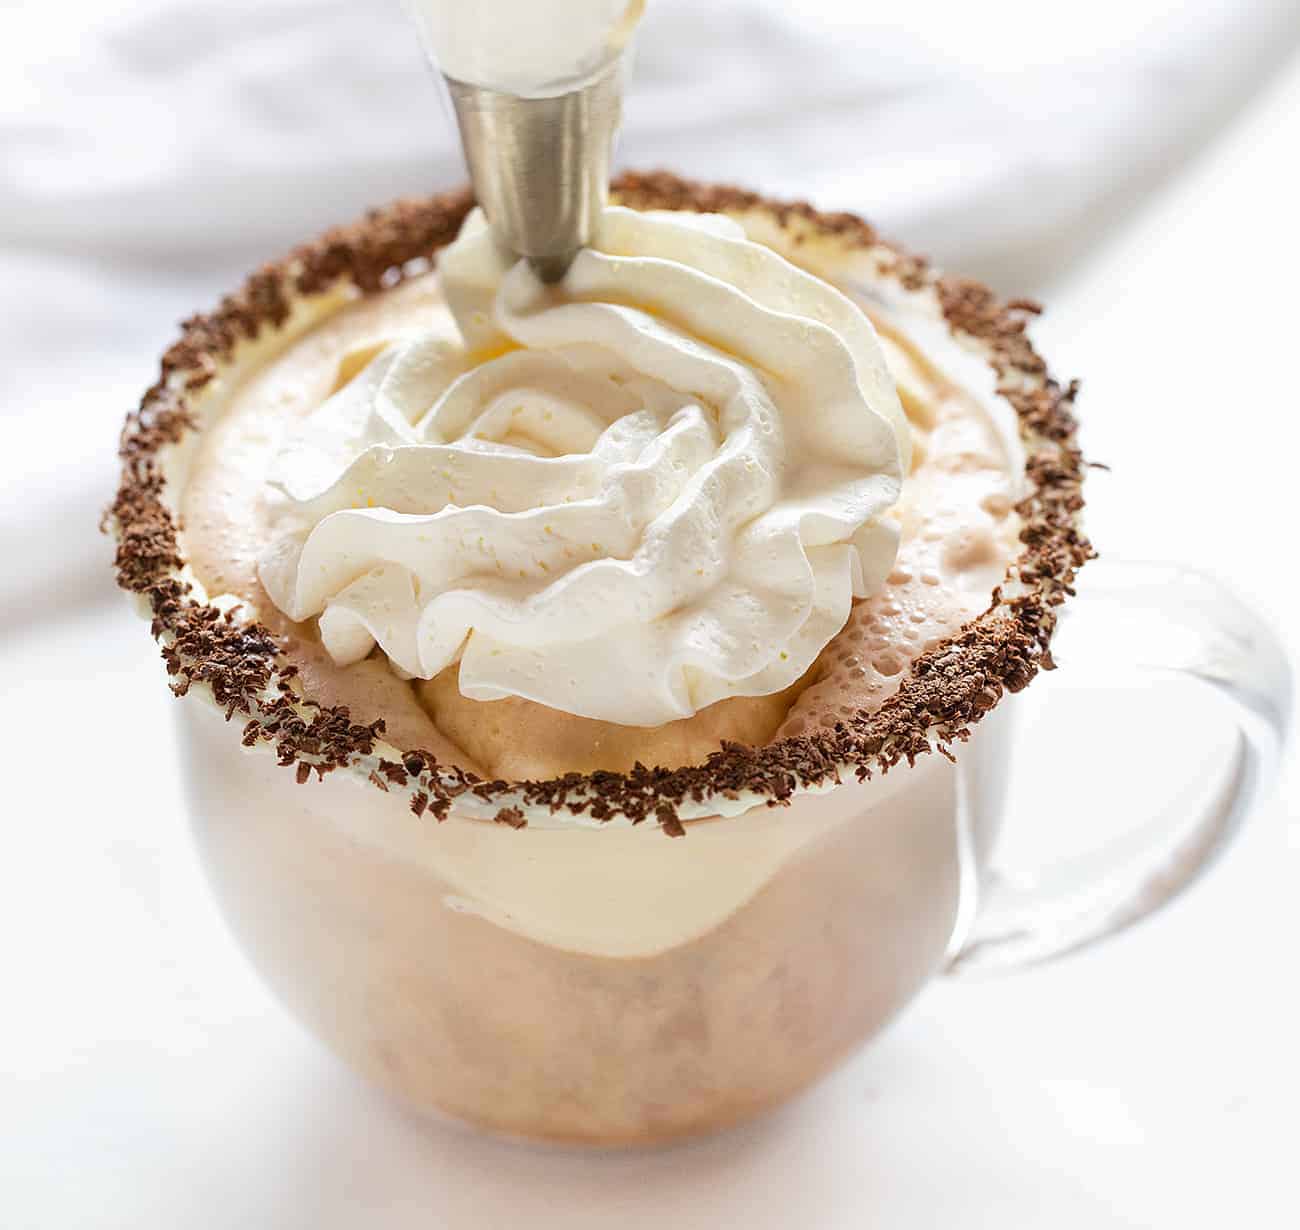 Adding Whipped Topping to a Hot Chocolate Drink